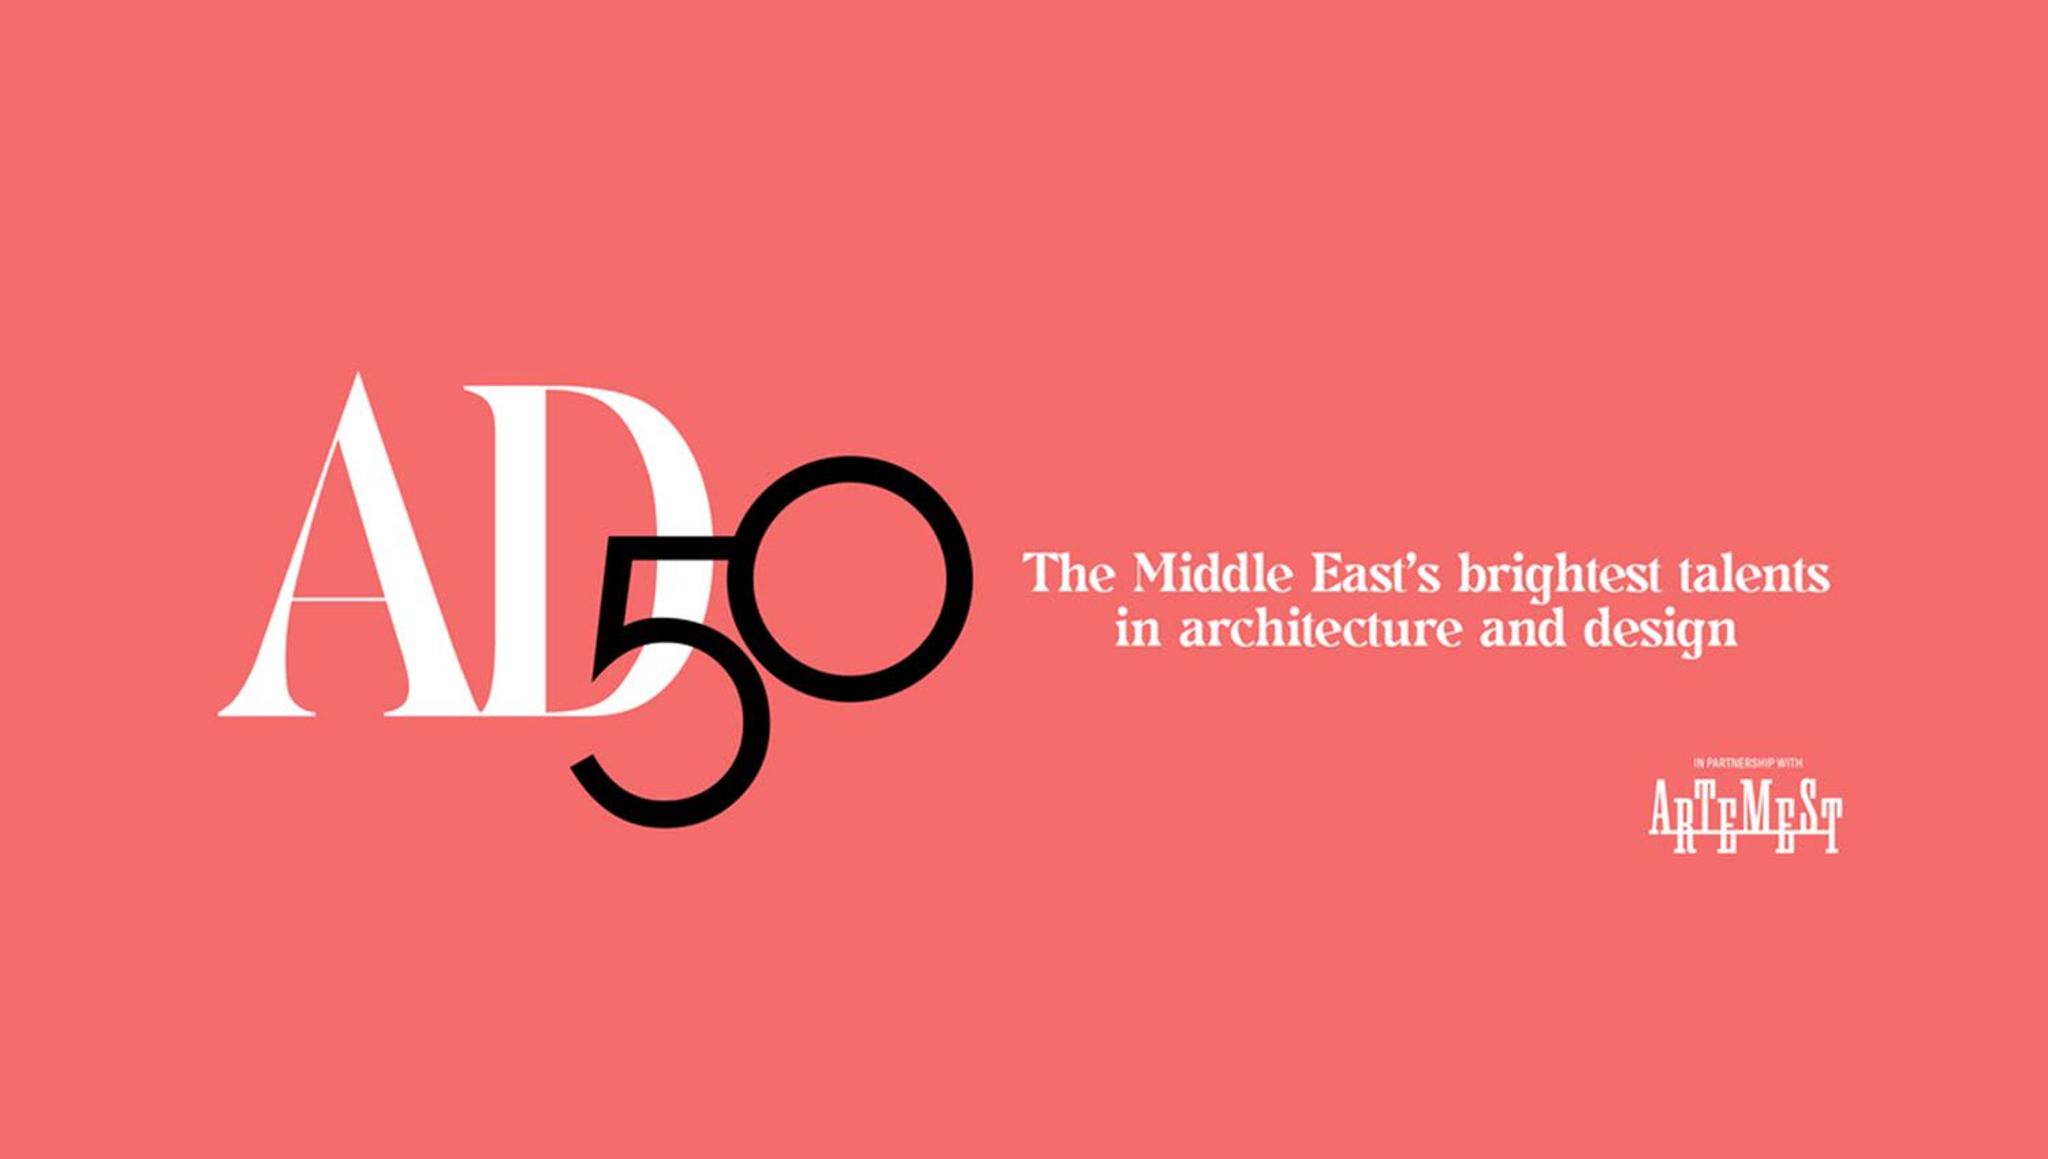 AD50 Middle East